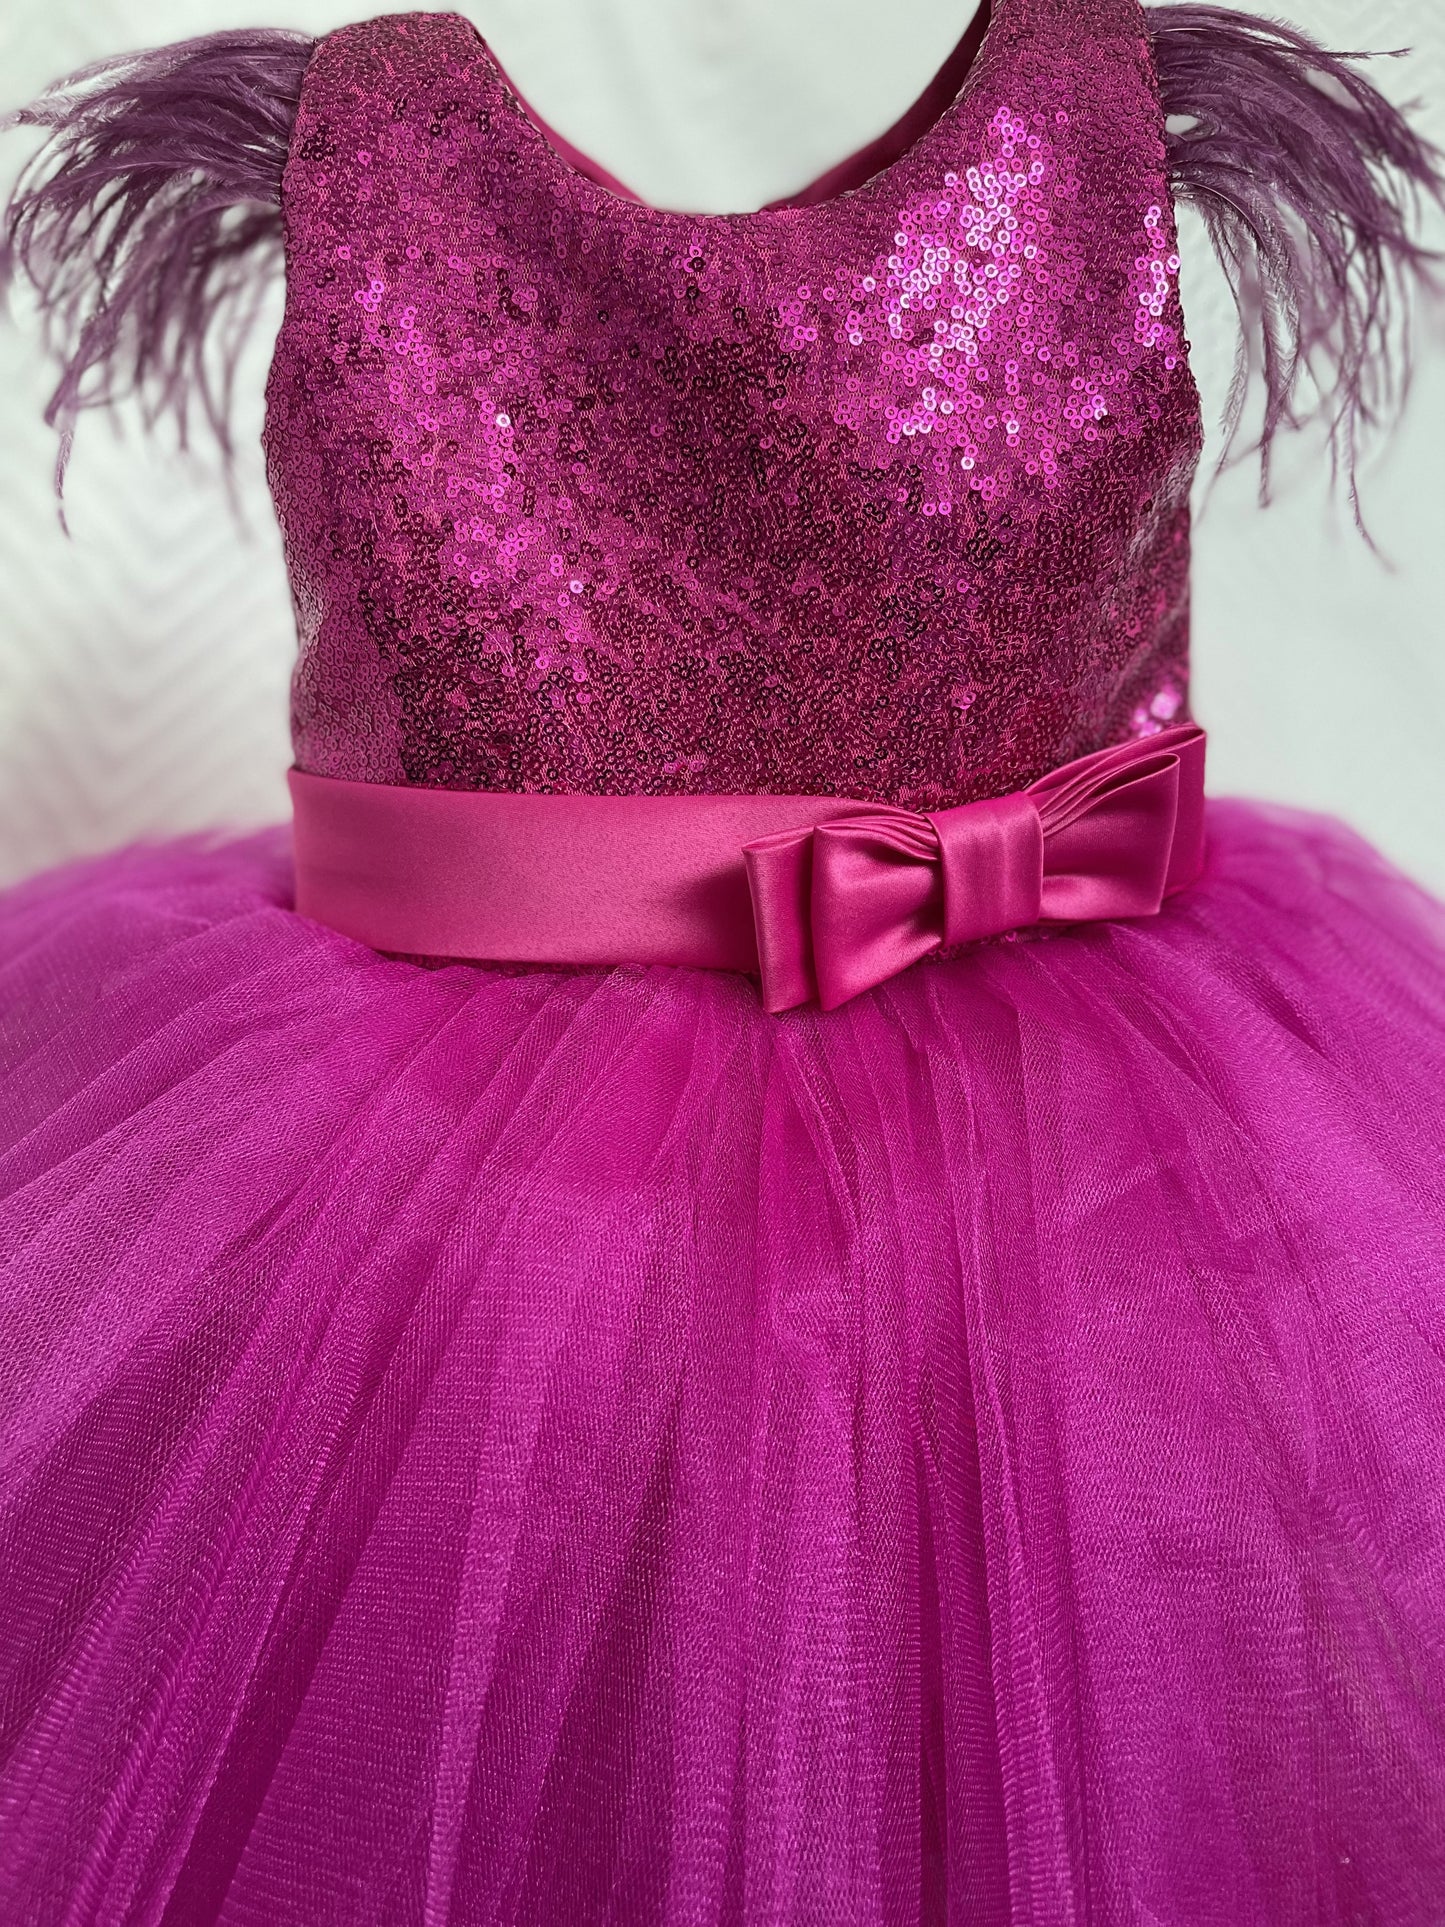 Purple Sequin Dress with Feathers